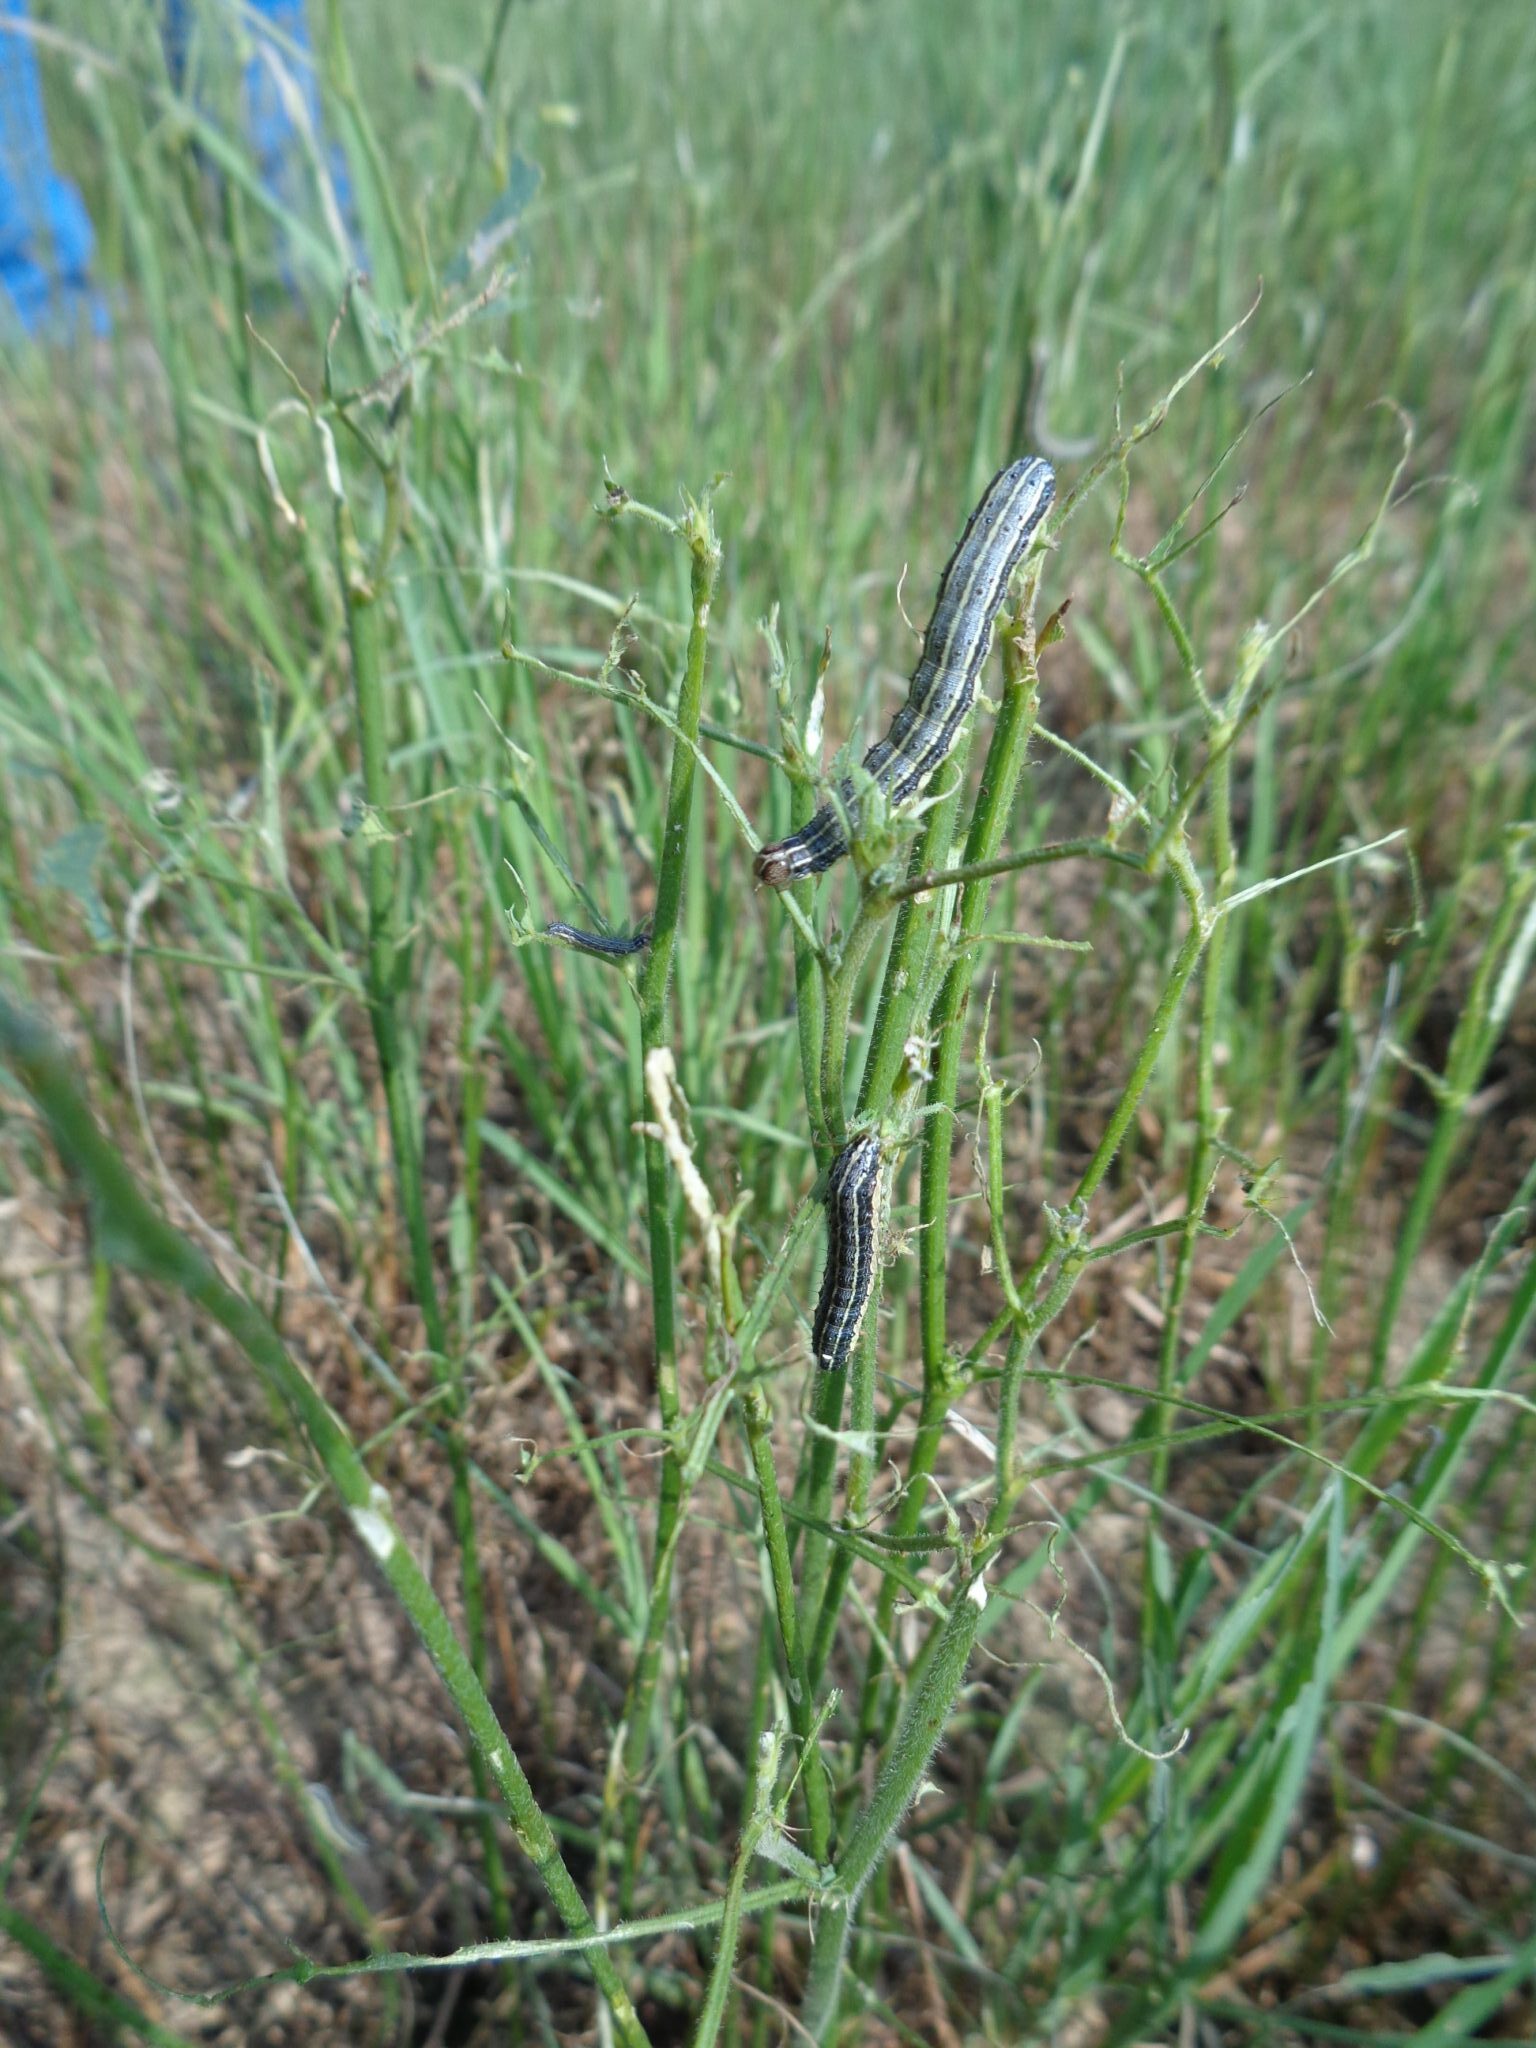 Fall armyworms invaded many forage fields in Indiana and surrounding states this past week. (Photo Credit: Brad Shelton, Superintendent, Feldun-Purdue Agriculture Center)